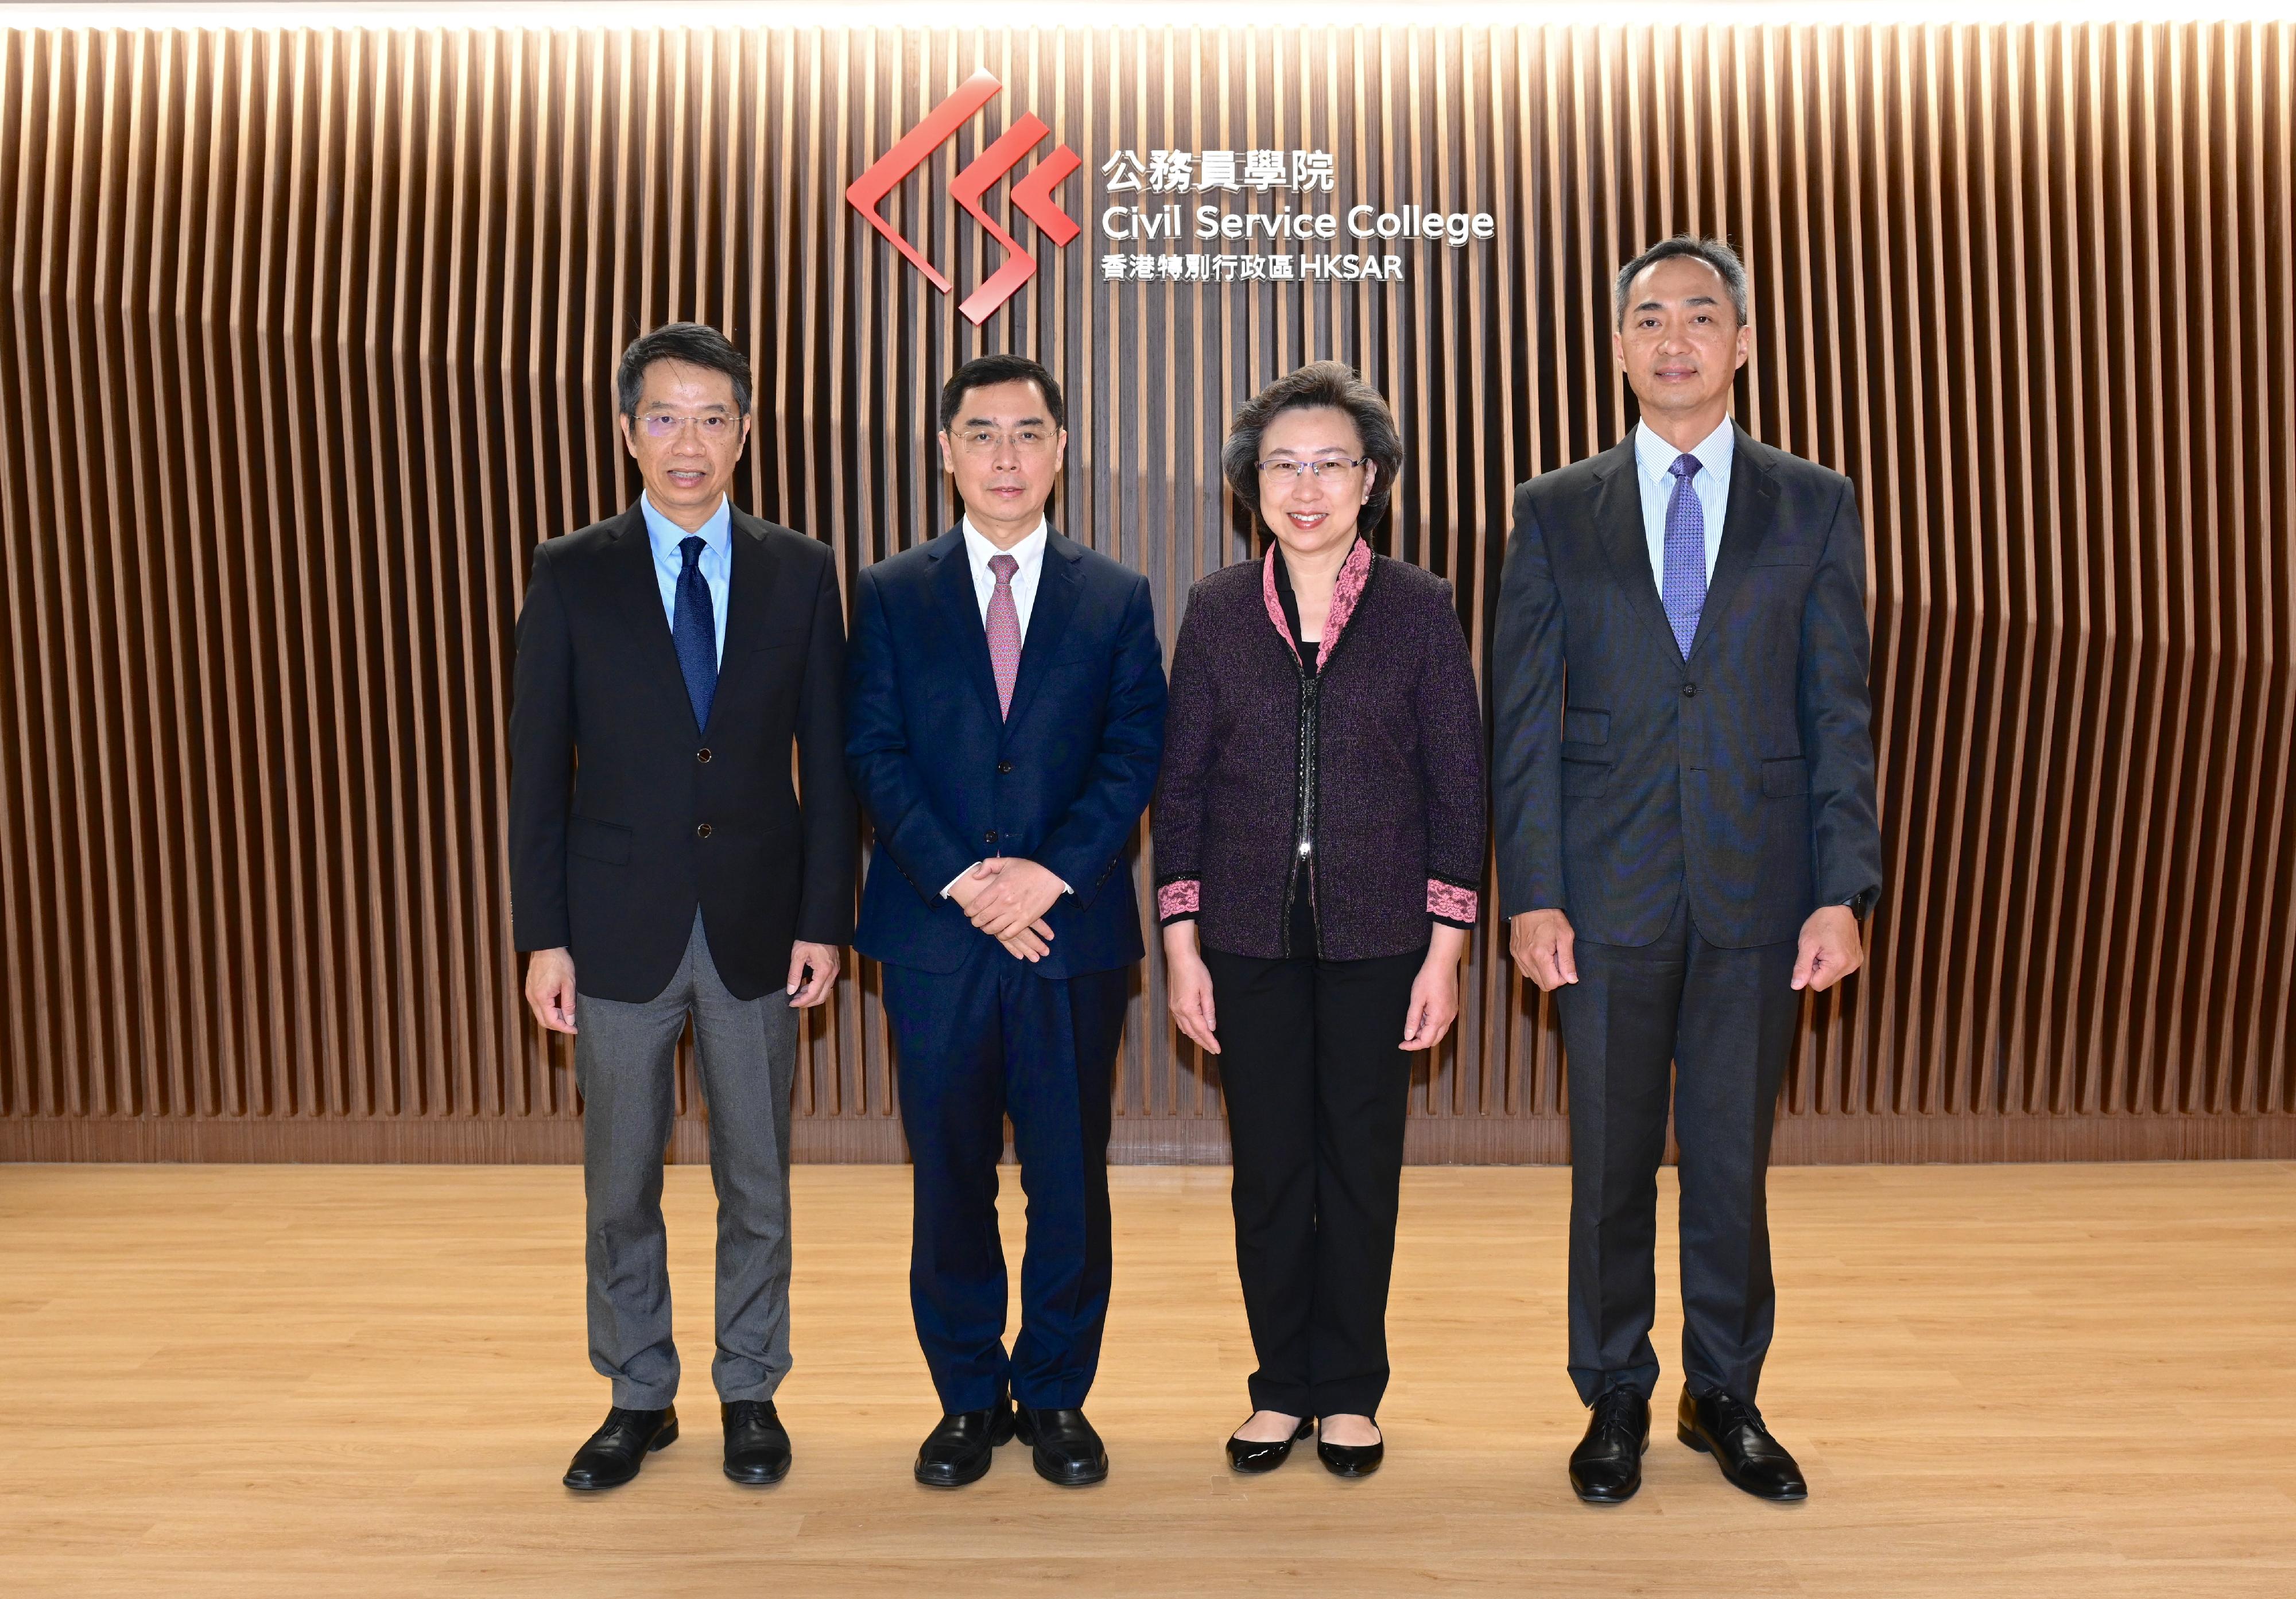 The Civil Service College (CSC) today (November 29) held a talk of the series on the country's foreign affairs jointly with the Office of the Commissioner of the Ministry of Foreign Affairs in the Hong Kong Special Administrative Region on the topic of "The high-quality development of the Belt and Road Initiative and policy recommendations for Hong Kong's participation in the Initiative". Photo shows (from left) the Permanent Secretary for the Civil Service, Mr Clement Leung; the Director-General of the Department of International Economic Affairs of the Ministry of Foreign Affairs, Mr Li Kexin; the Secretary for the Civil Service, Mrs Ingrid Yeung; and the Head of the CSC, Mr Oscar Kwok.